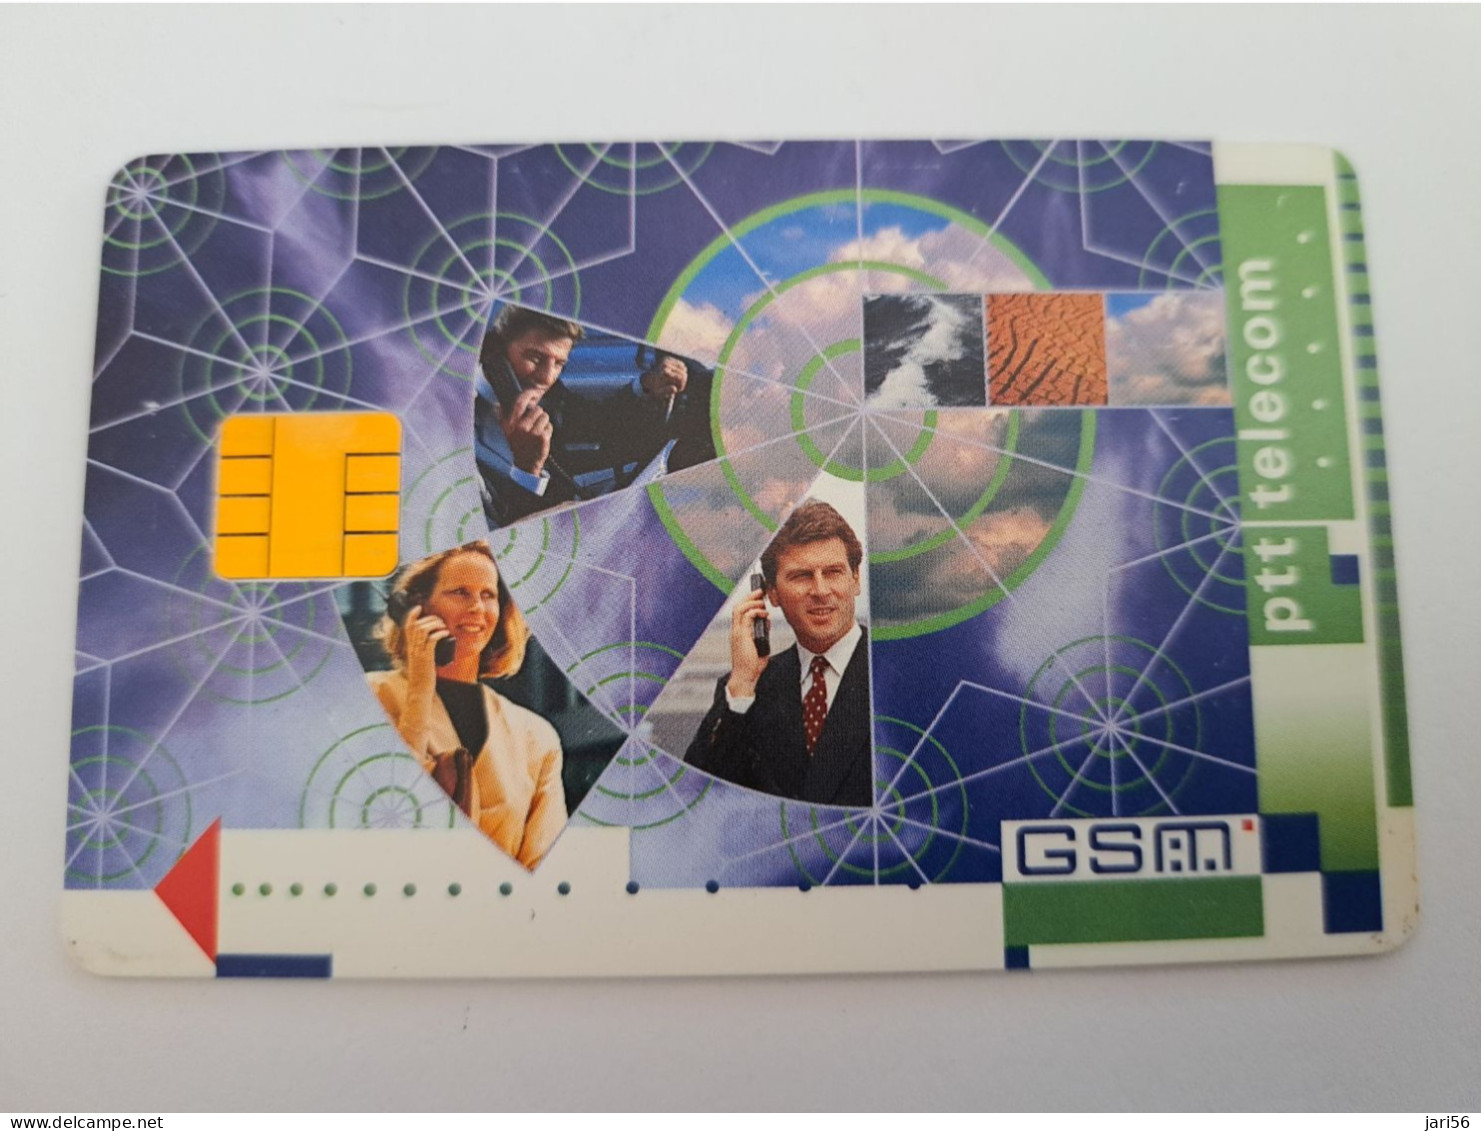 NETHERLANDS  GSM SIM CARD /  PTT  3 PEOPLE  ON PHONE    ( WITH CHIP)   CARD  ** 14841** - [3] Sim Cards, Prepaid & Refills